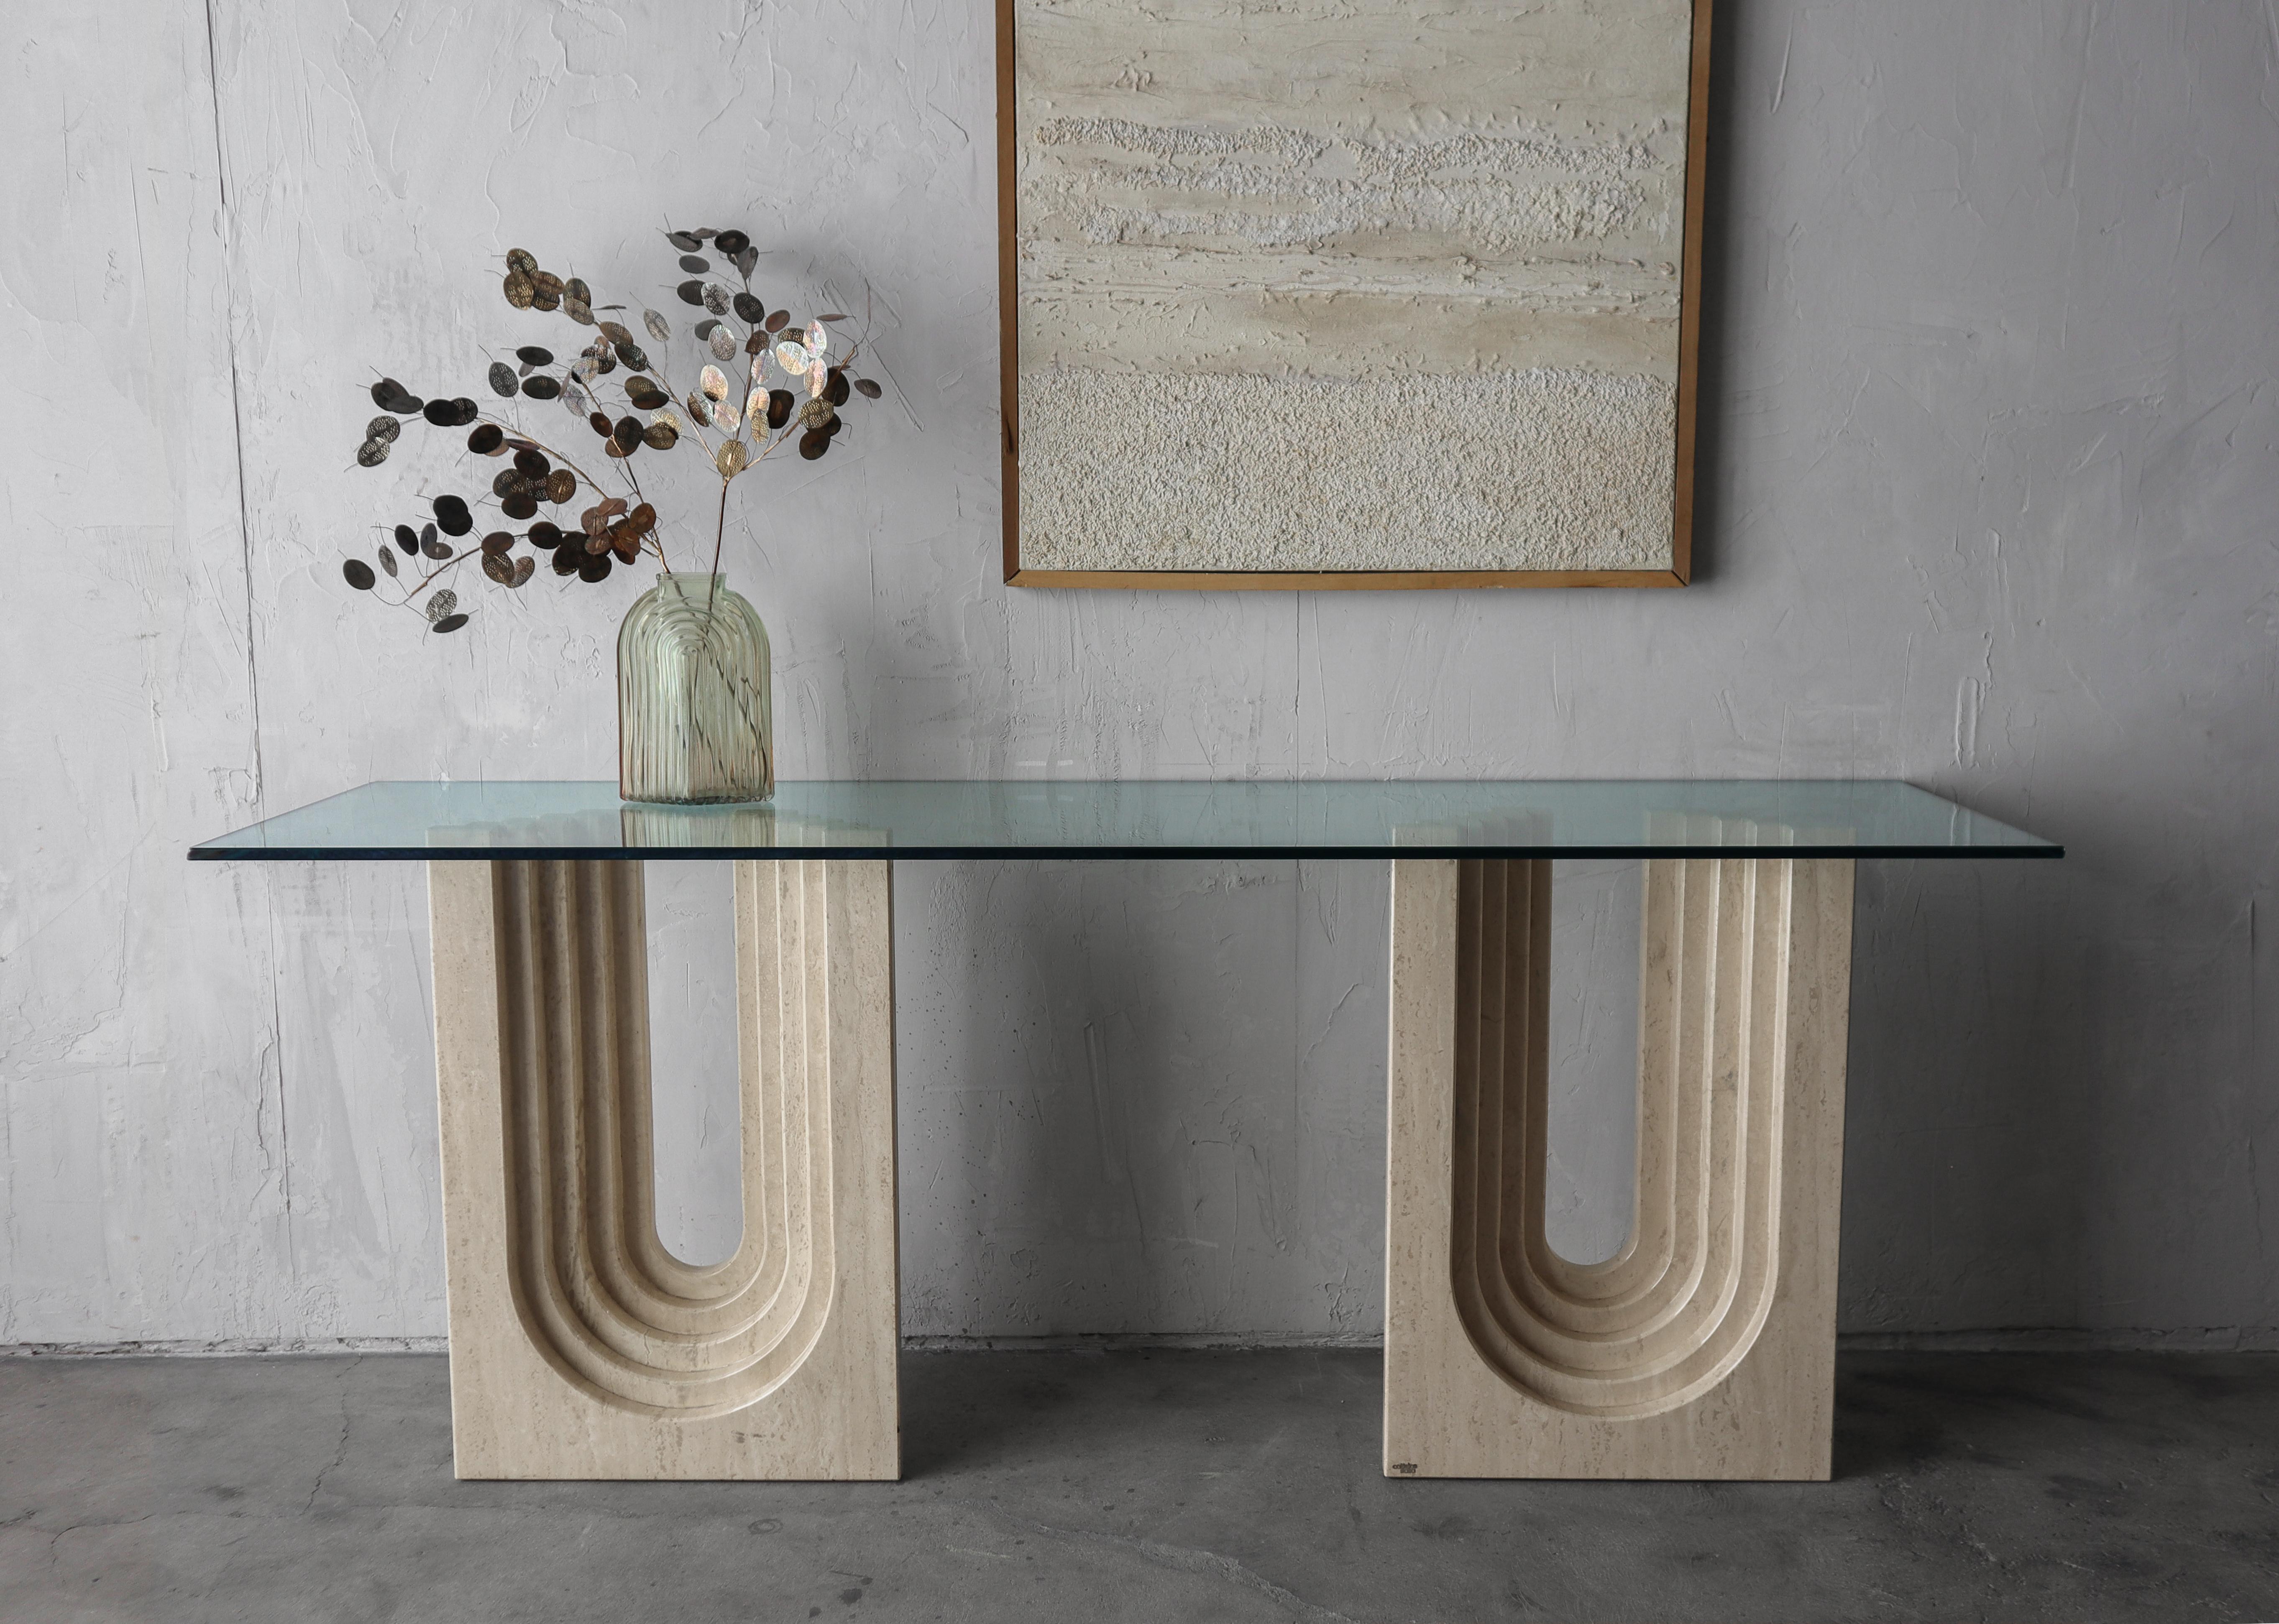 Nothing short of amazing. A pair of solid, polished travertine pedestals by Carlo Scarpa for Cattelan Italia.  The pedestals are designed in a staggered, architectural arch pattern giving them extreme depth and interest. 

Shown as a round dining